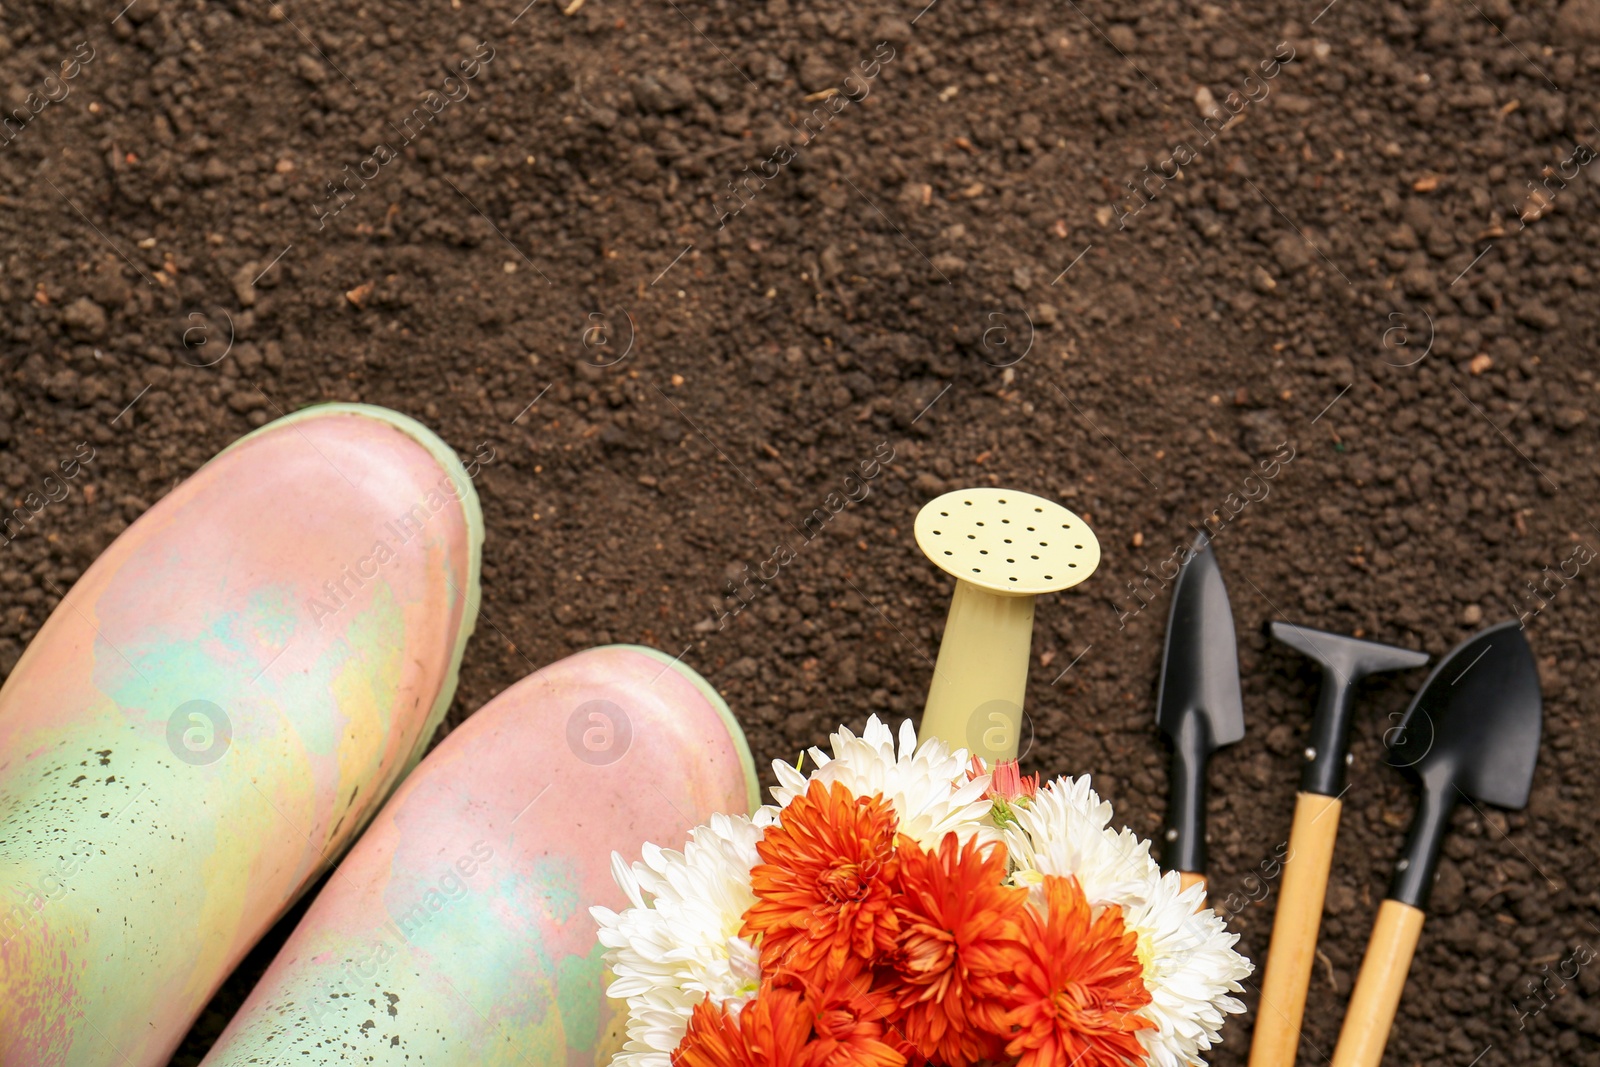 Photo of Gardening tools, boots and flowers on fresh soil, flat lay. Space for text